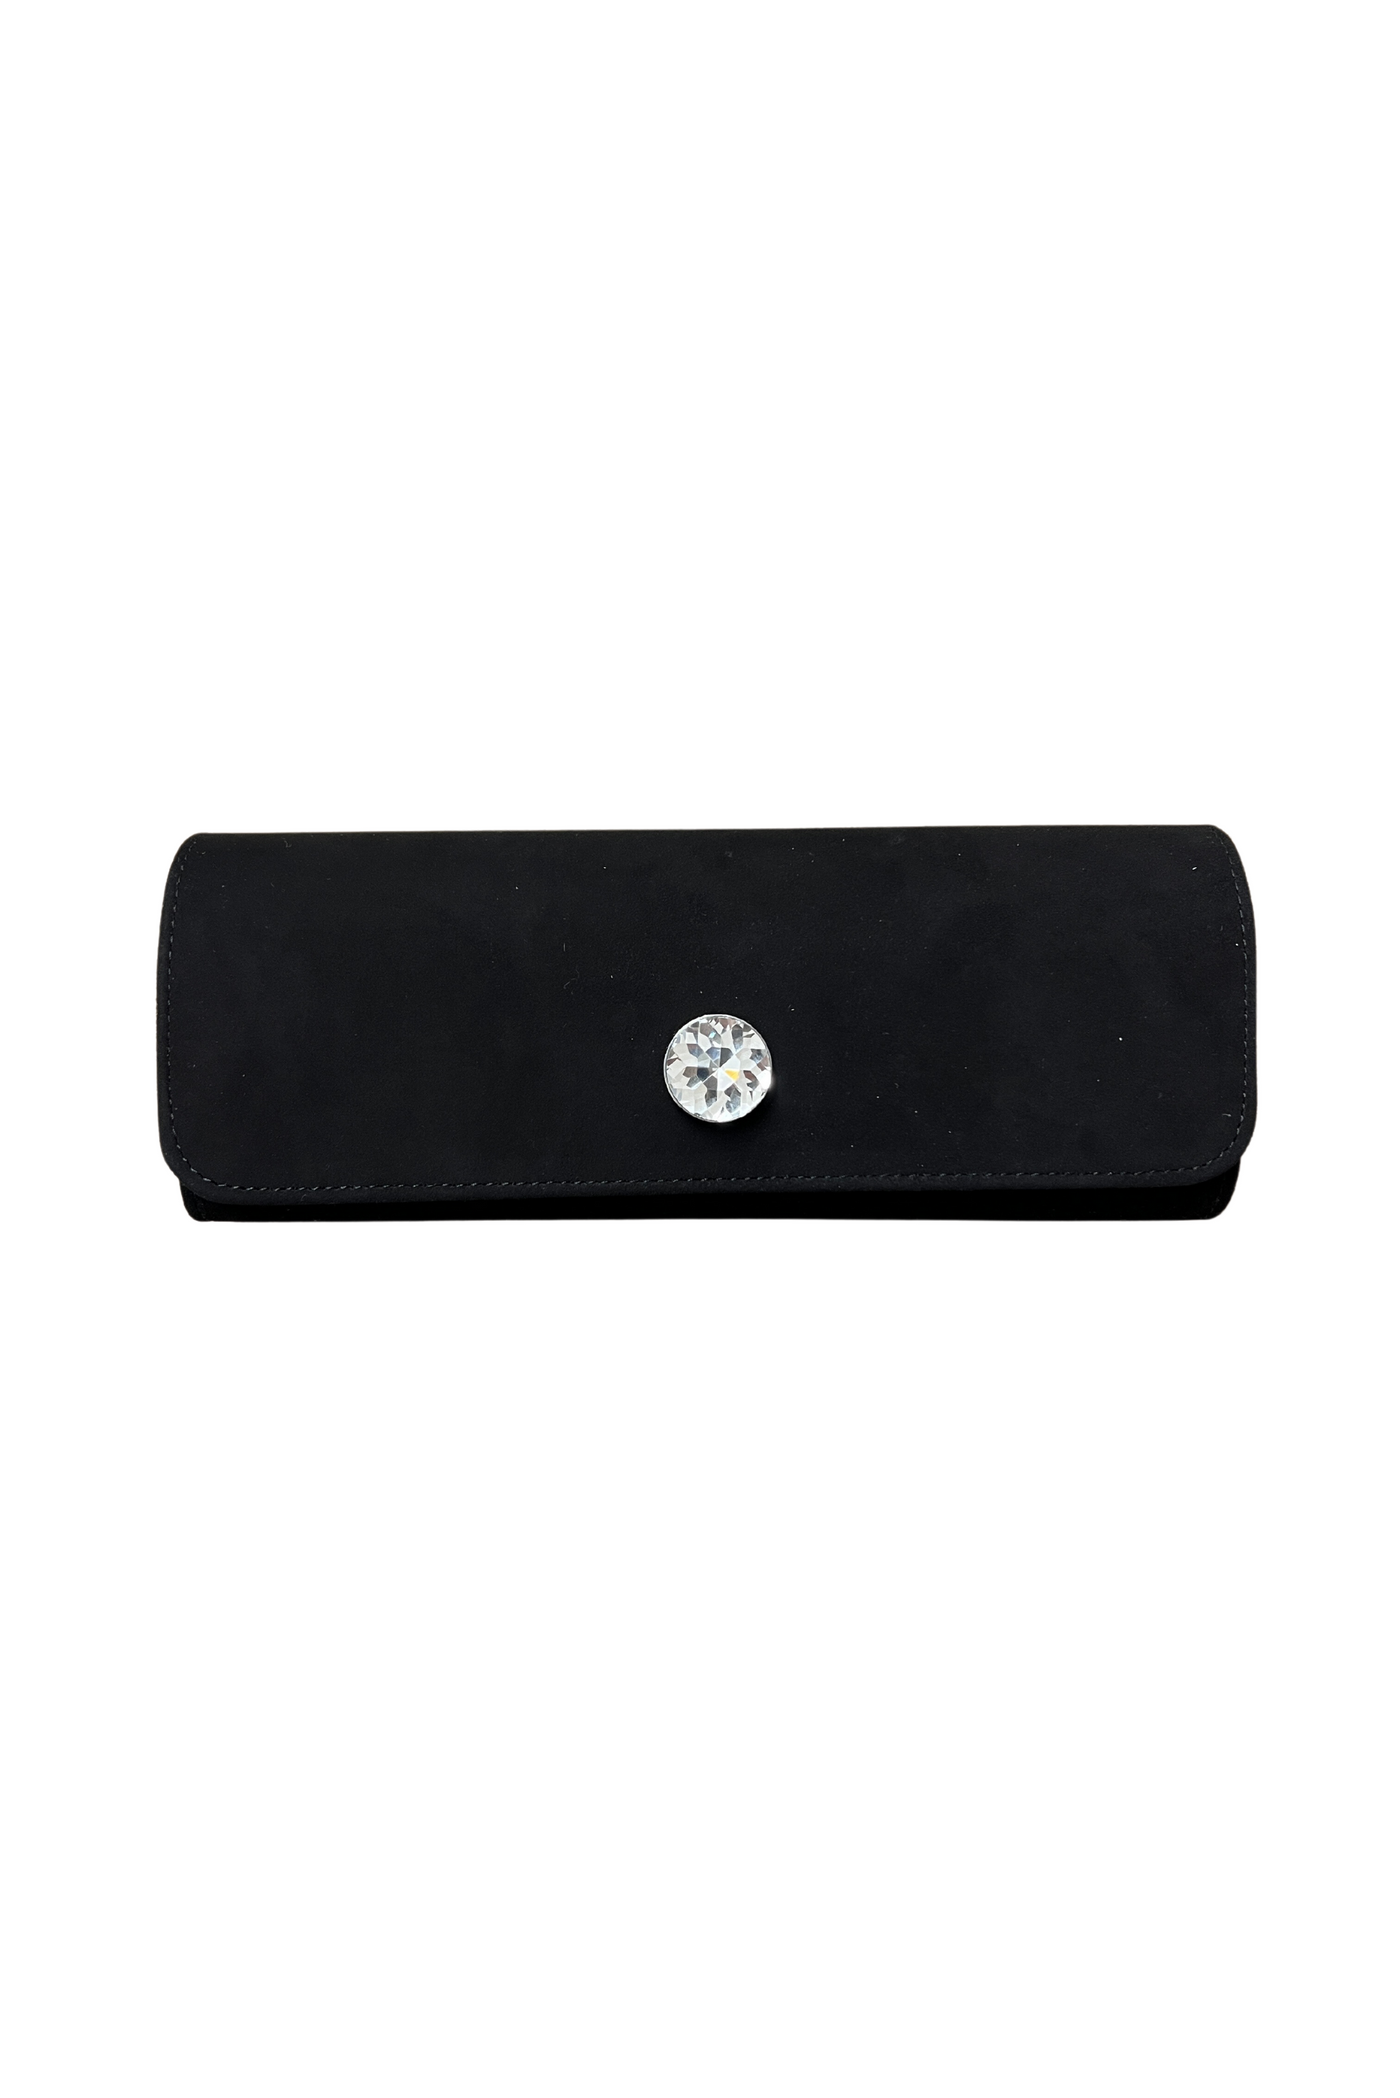 Black Suede Clutch Bag with Diamond Detail